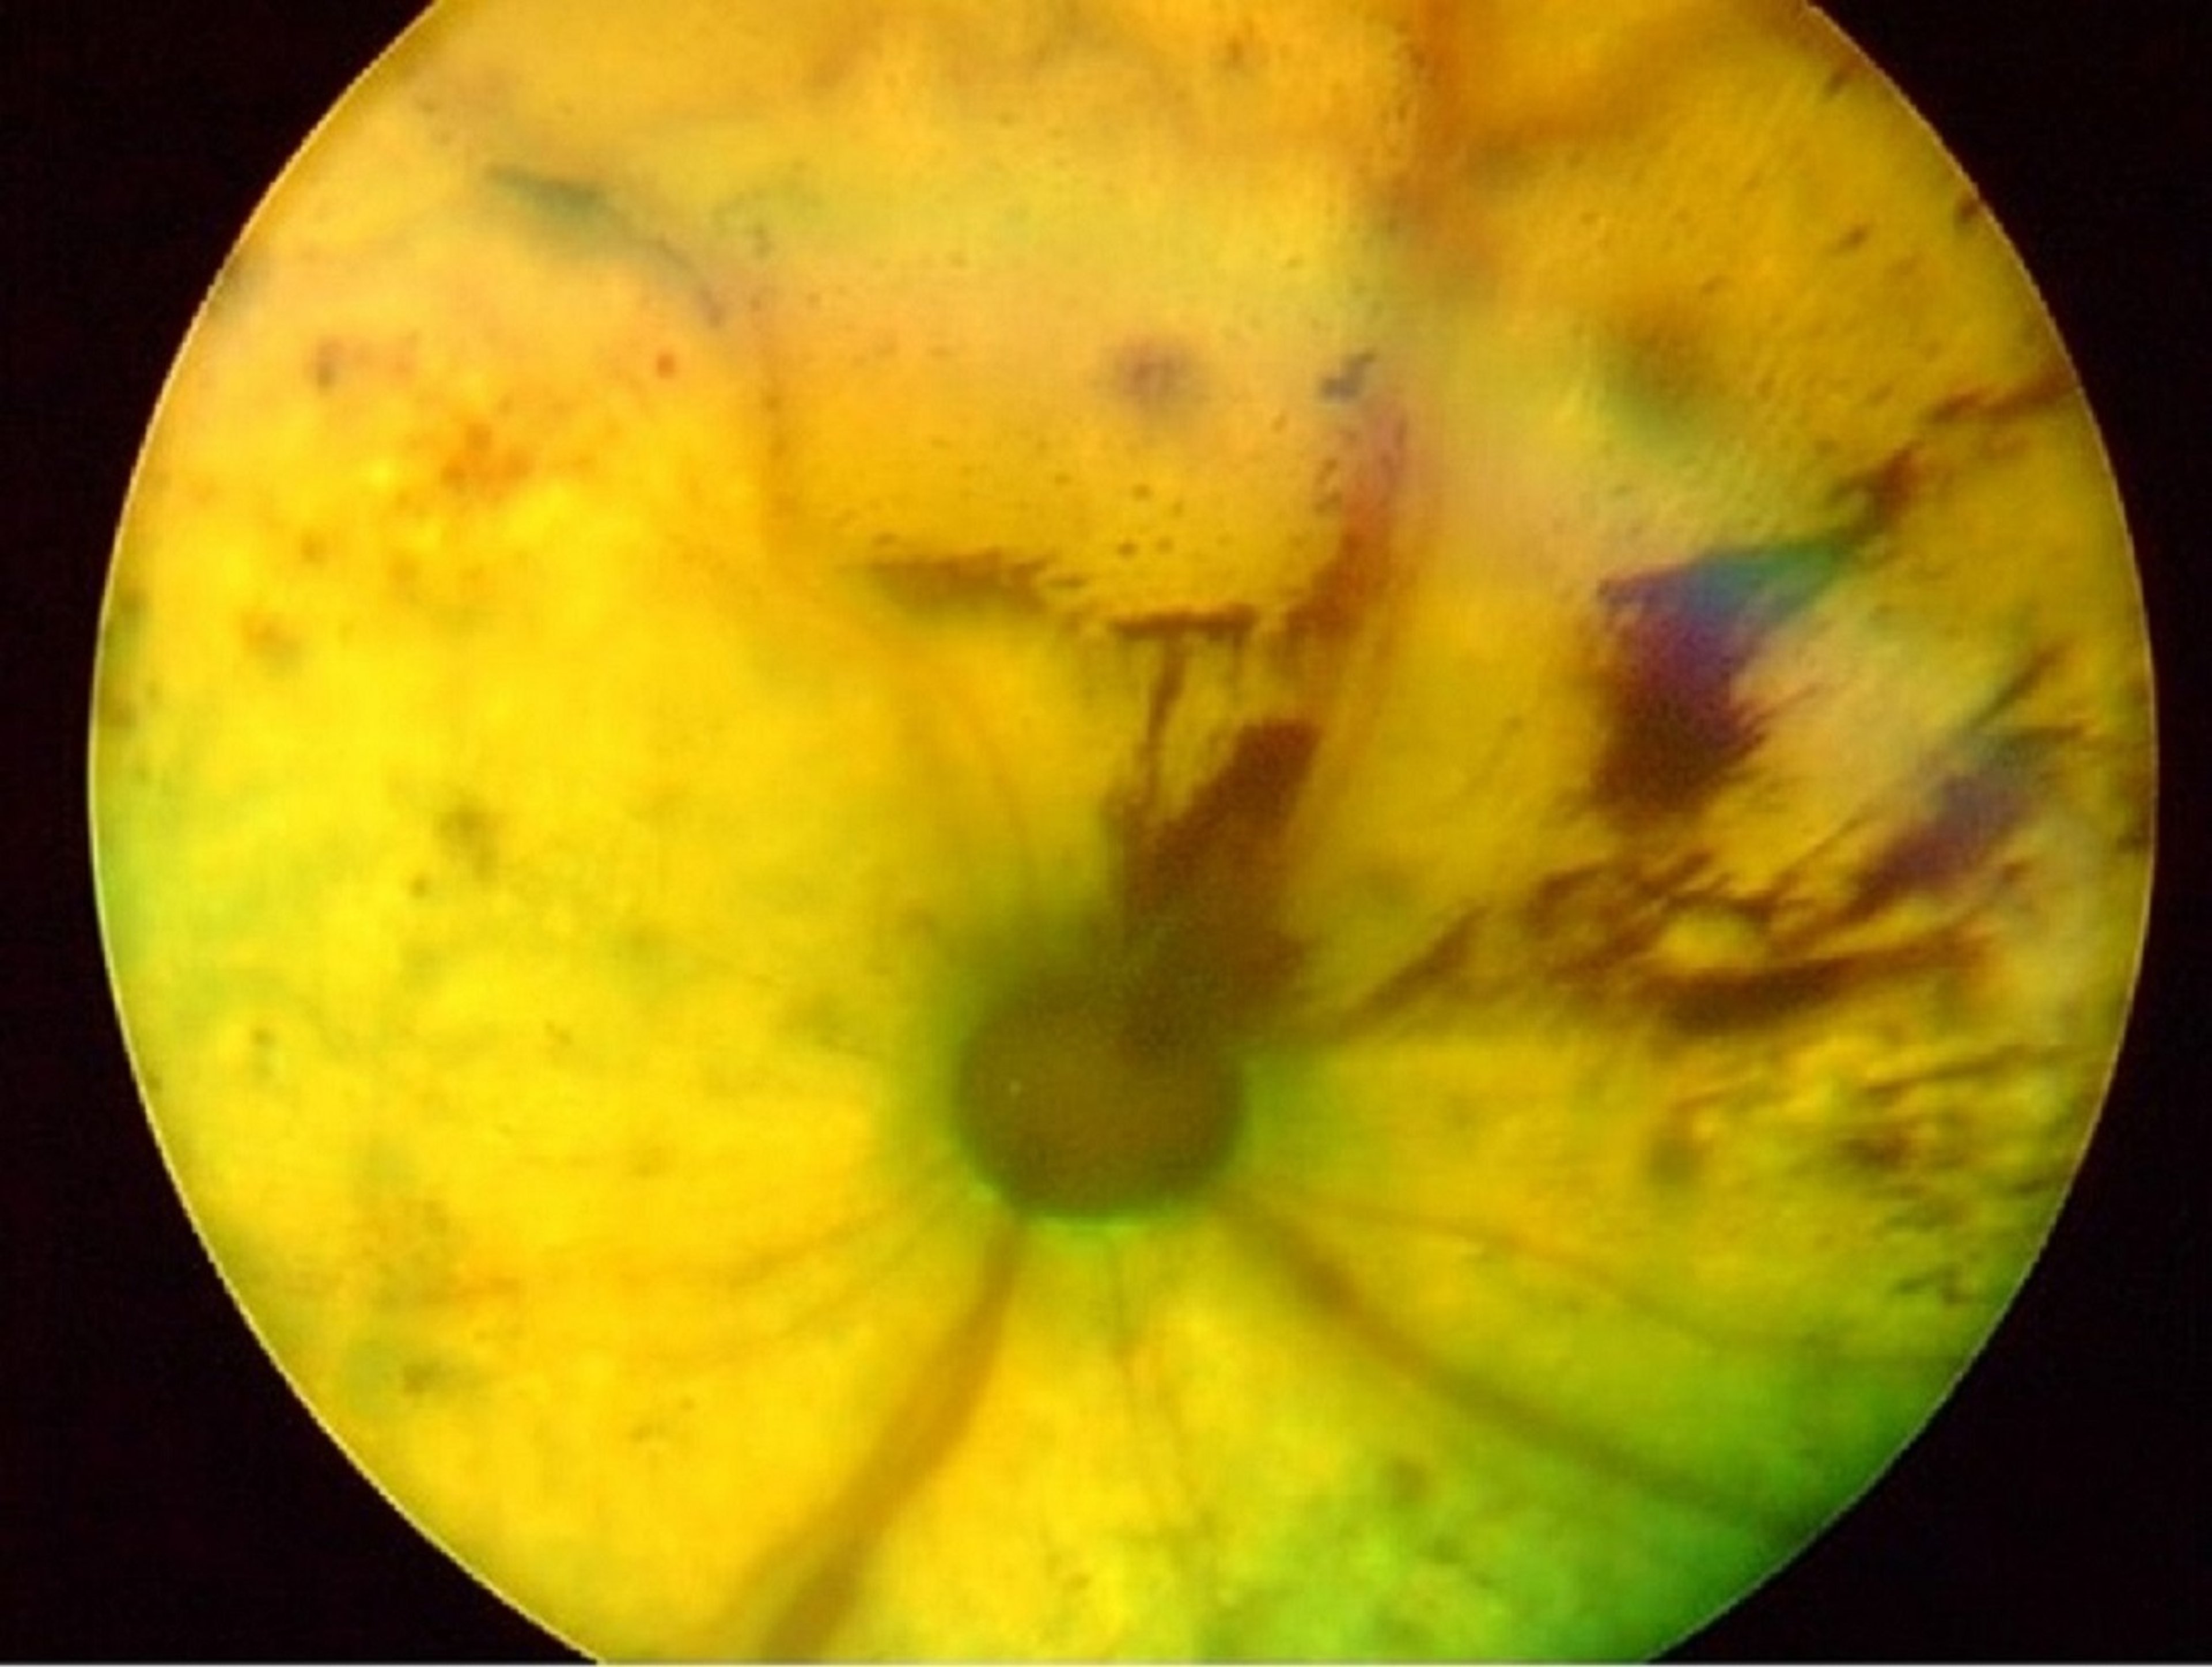 Intraocular hemorrhage and retinal detachment secondary to systemic hypertension, cat